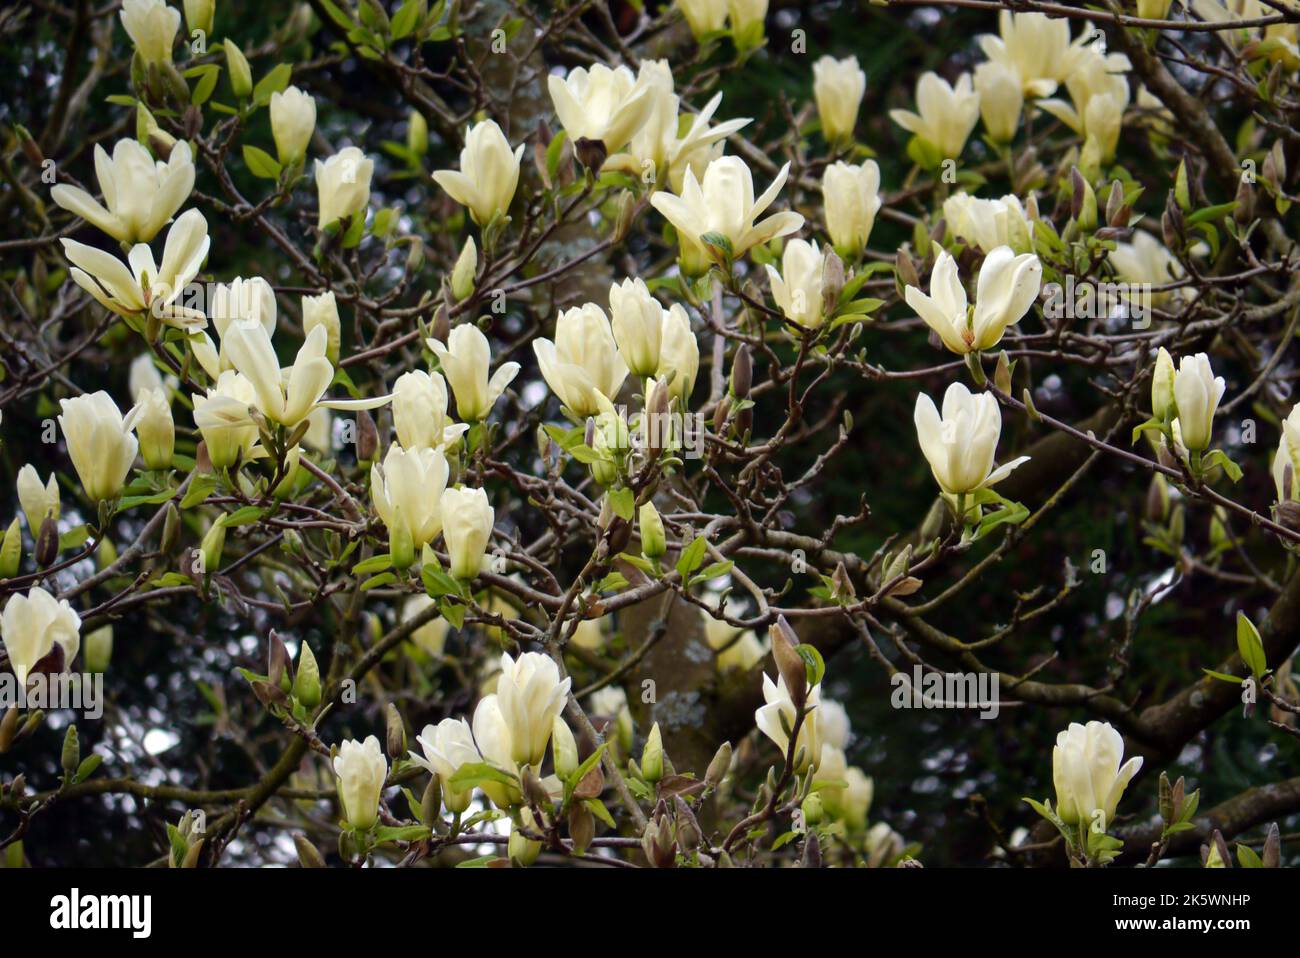 Flowering Pale Yellow/Lemon Coloured Rhododendron Tree (Azalea) Growing in Parkland at Holker Hall & Gardens, Lake District, Cumbria, England, UK. Stock Photo